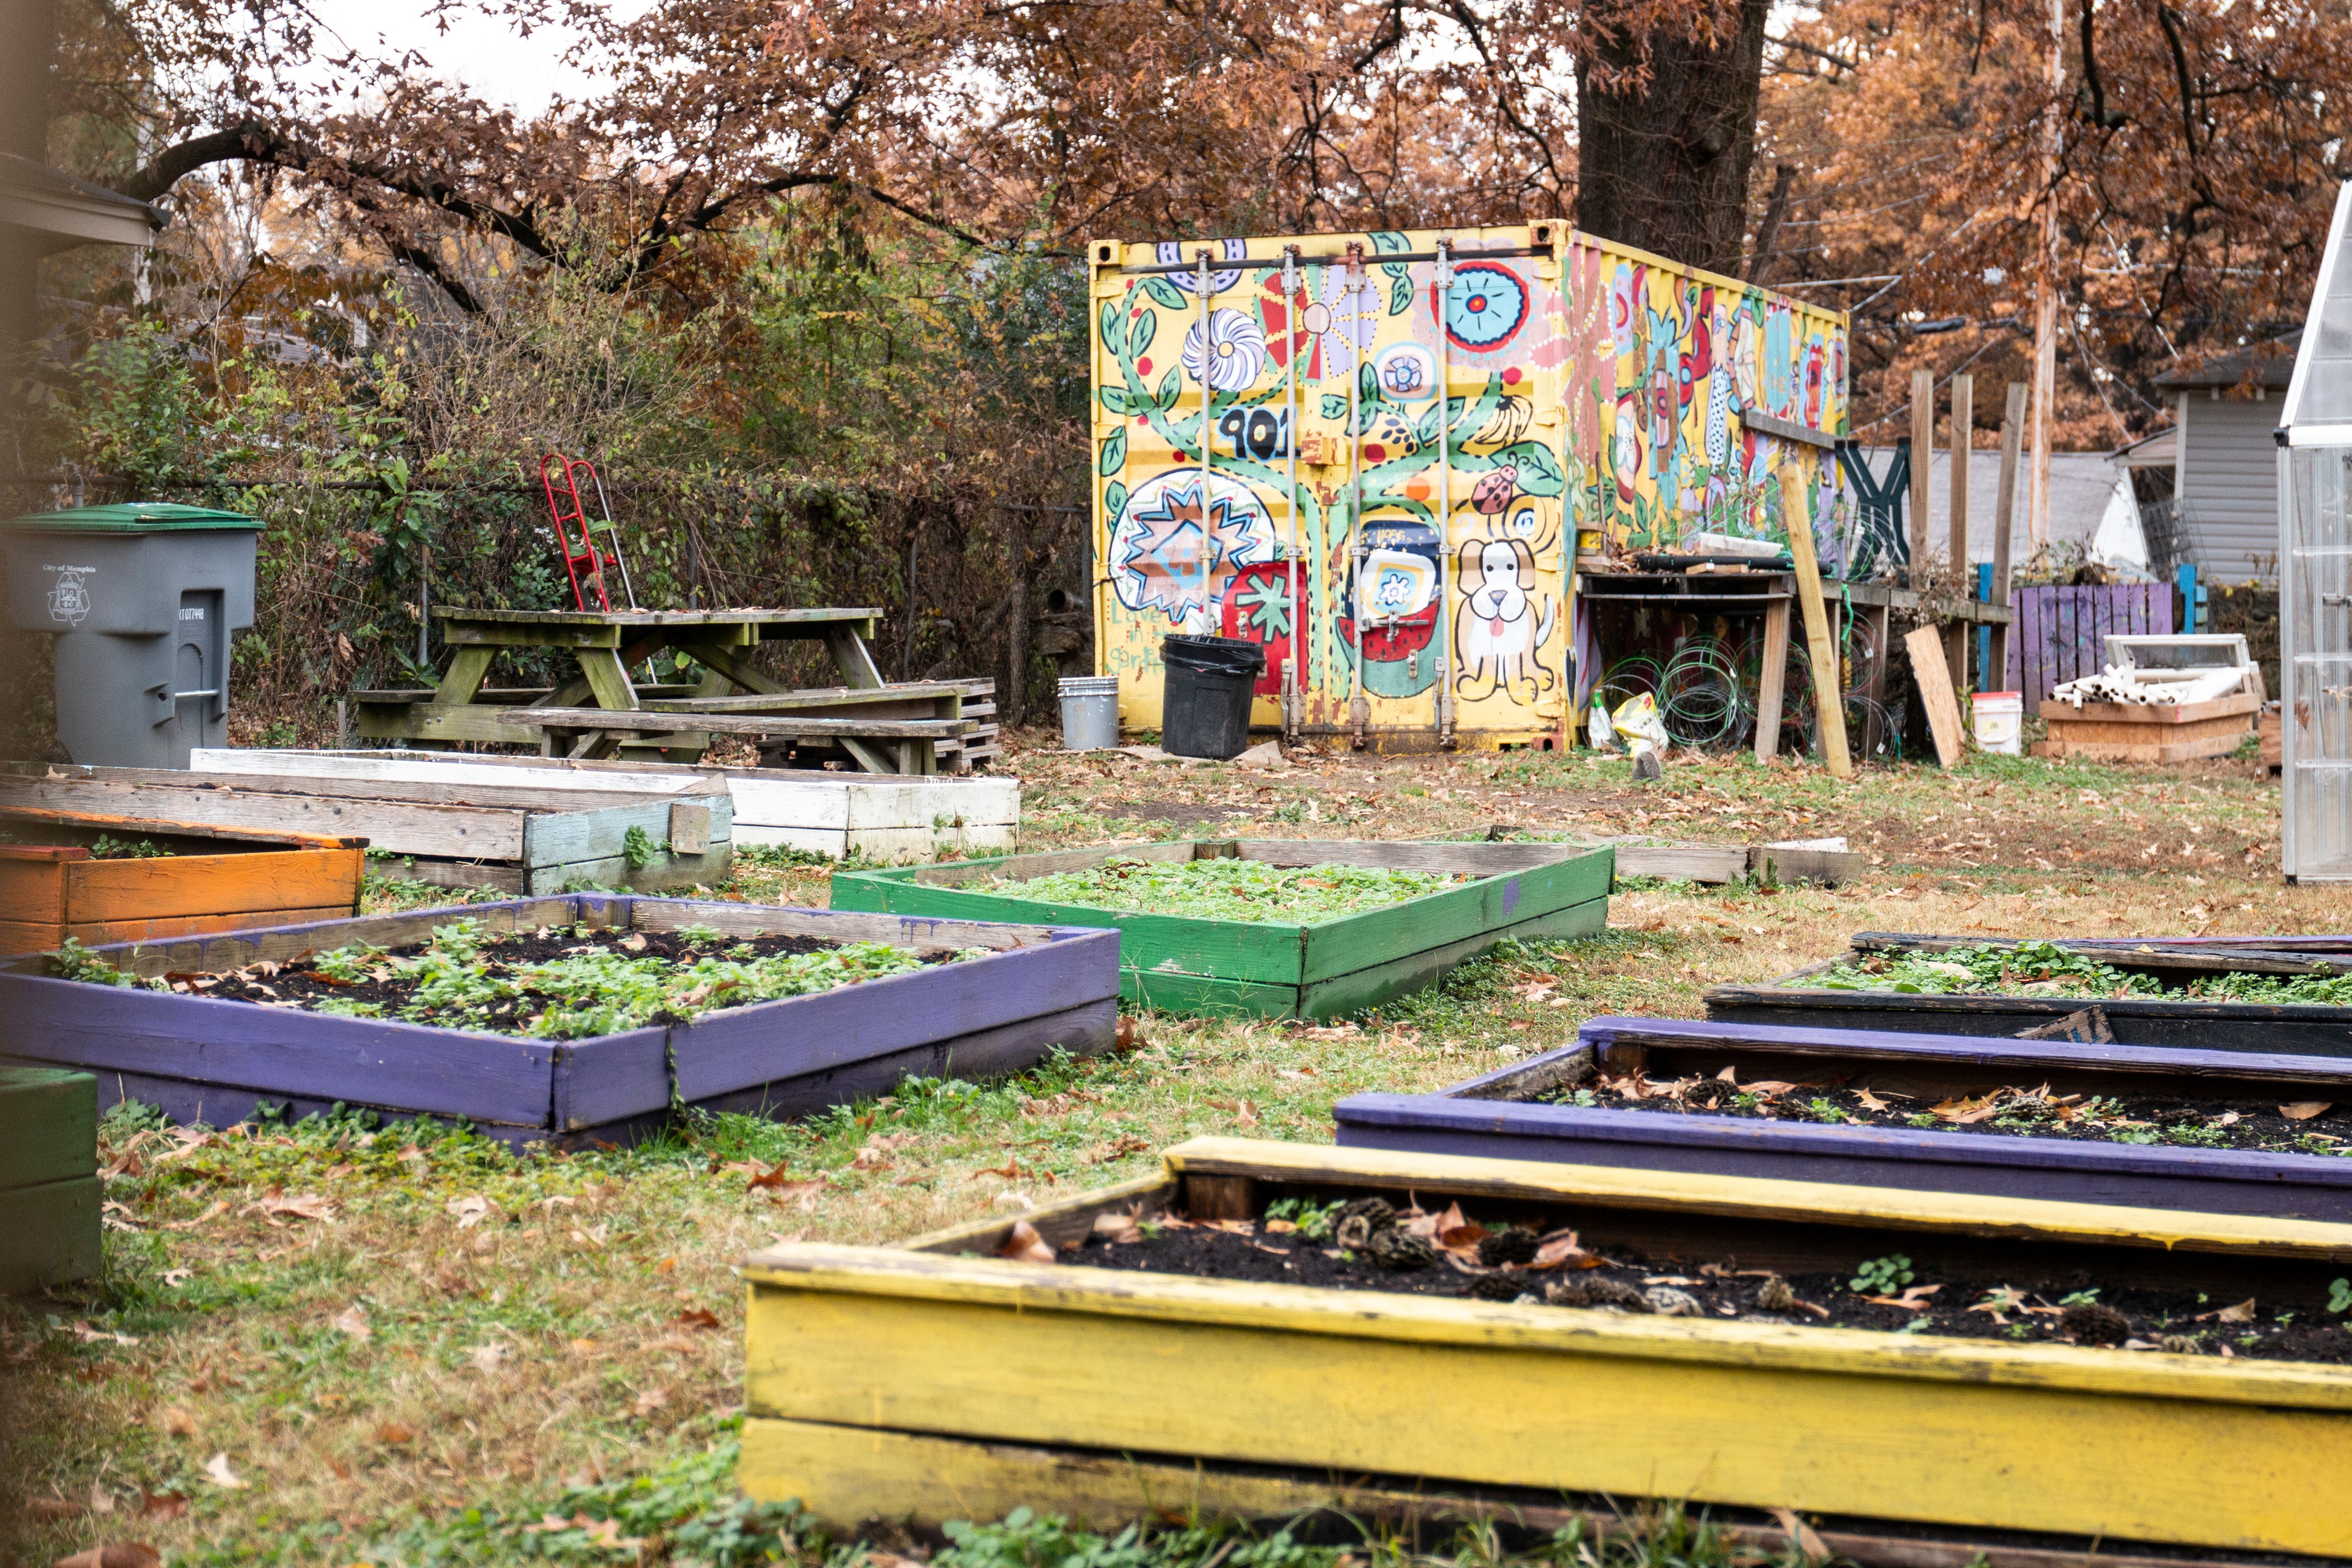 Carpenter Art Garden has redeveloped three vacant lots into community gardens for the Binghampton community. According to Henry Nelson, they're in the works of acquiring more land in an effort to reverse blight. (Kirstin Cheers)